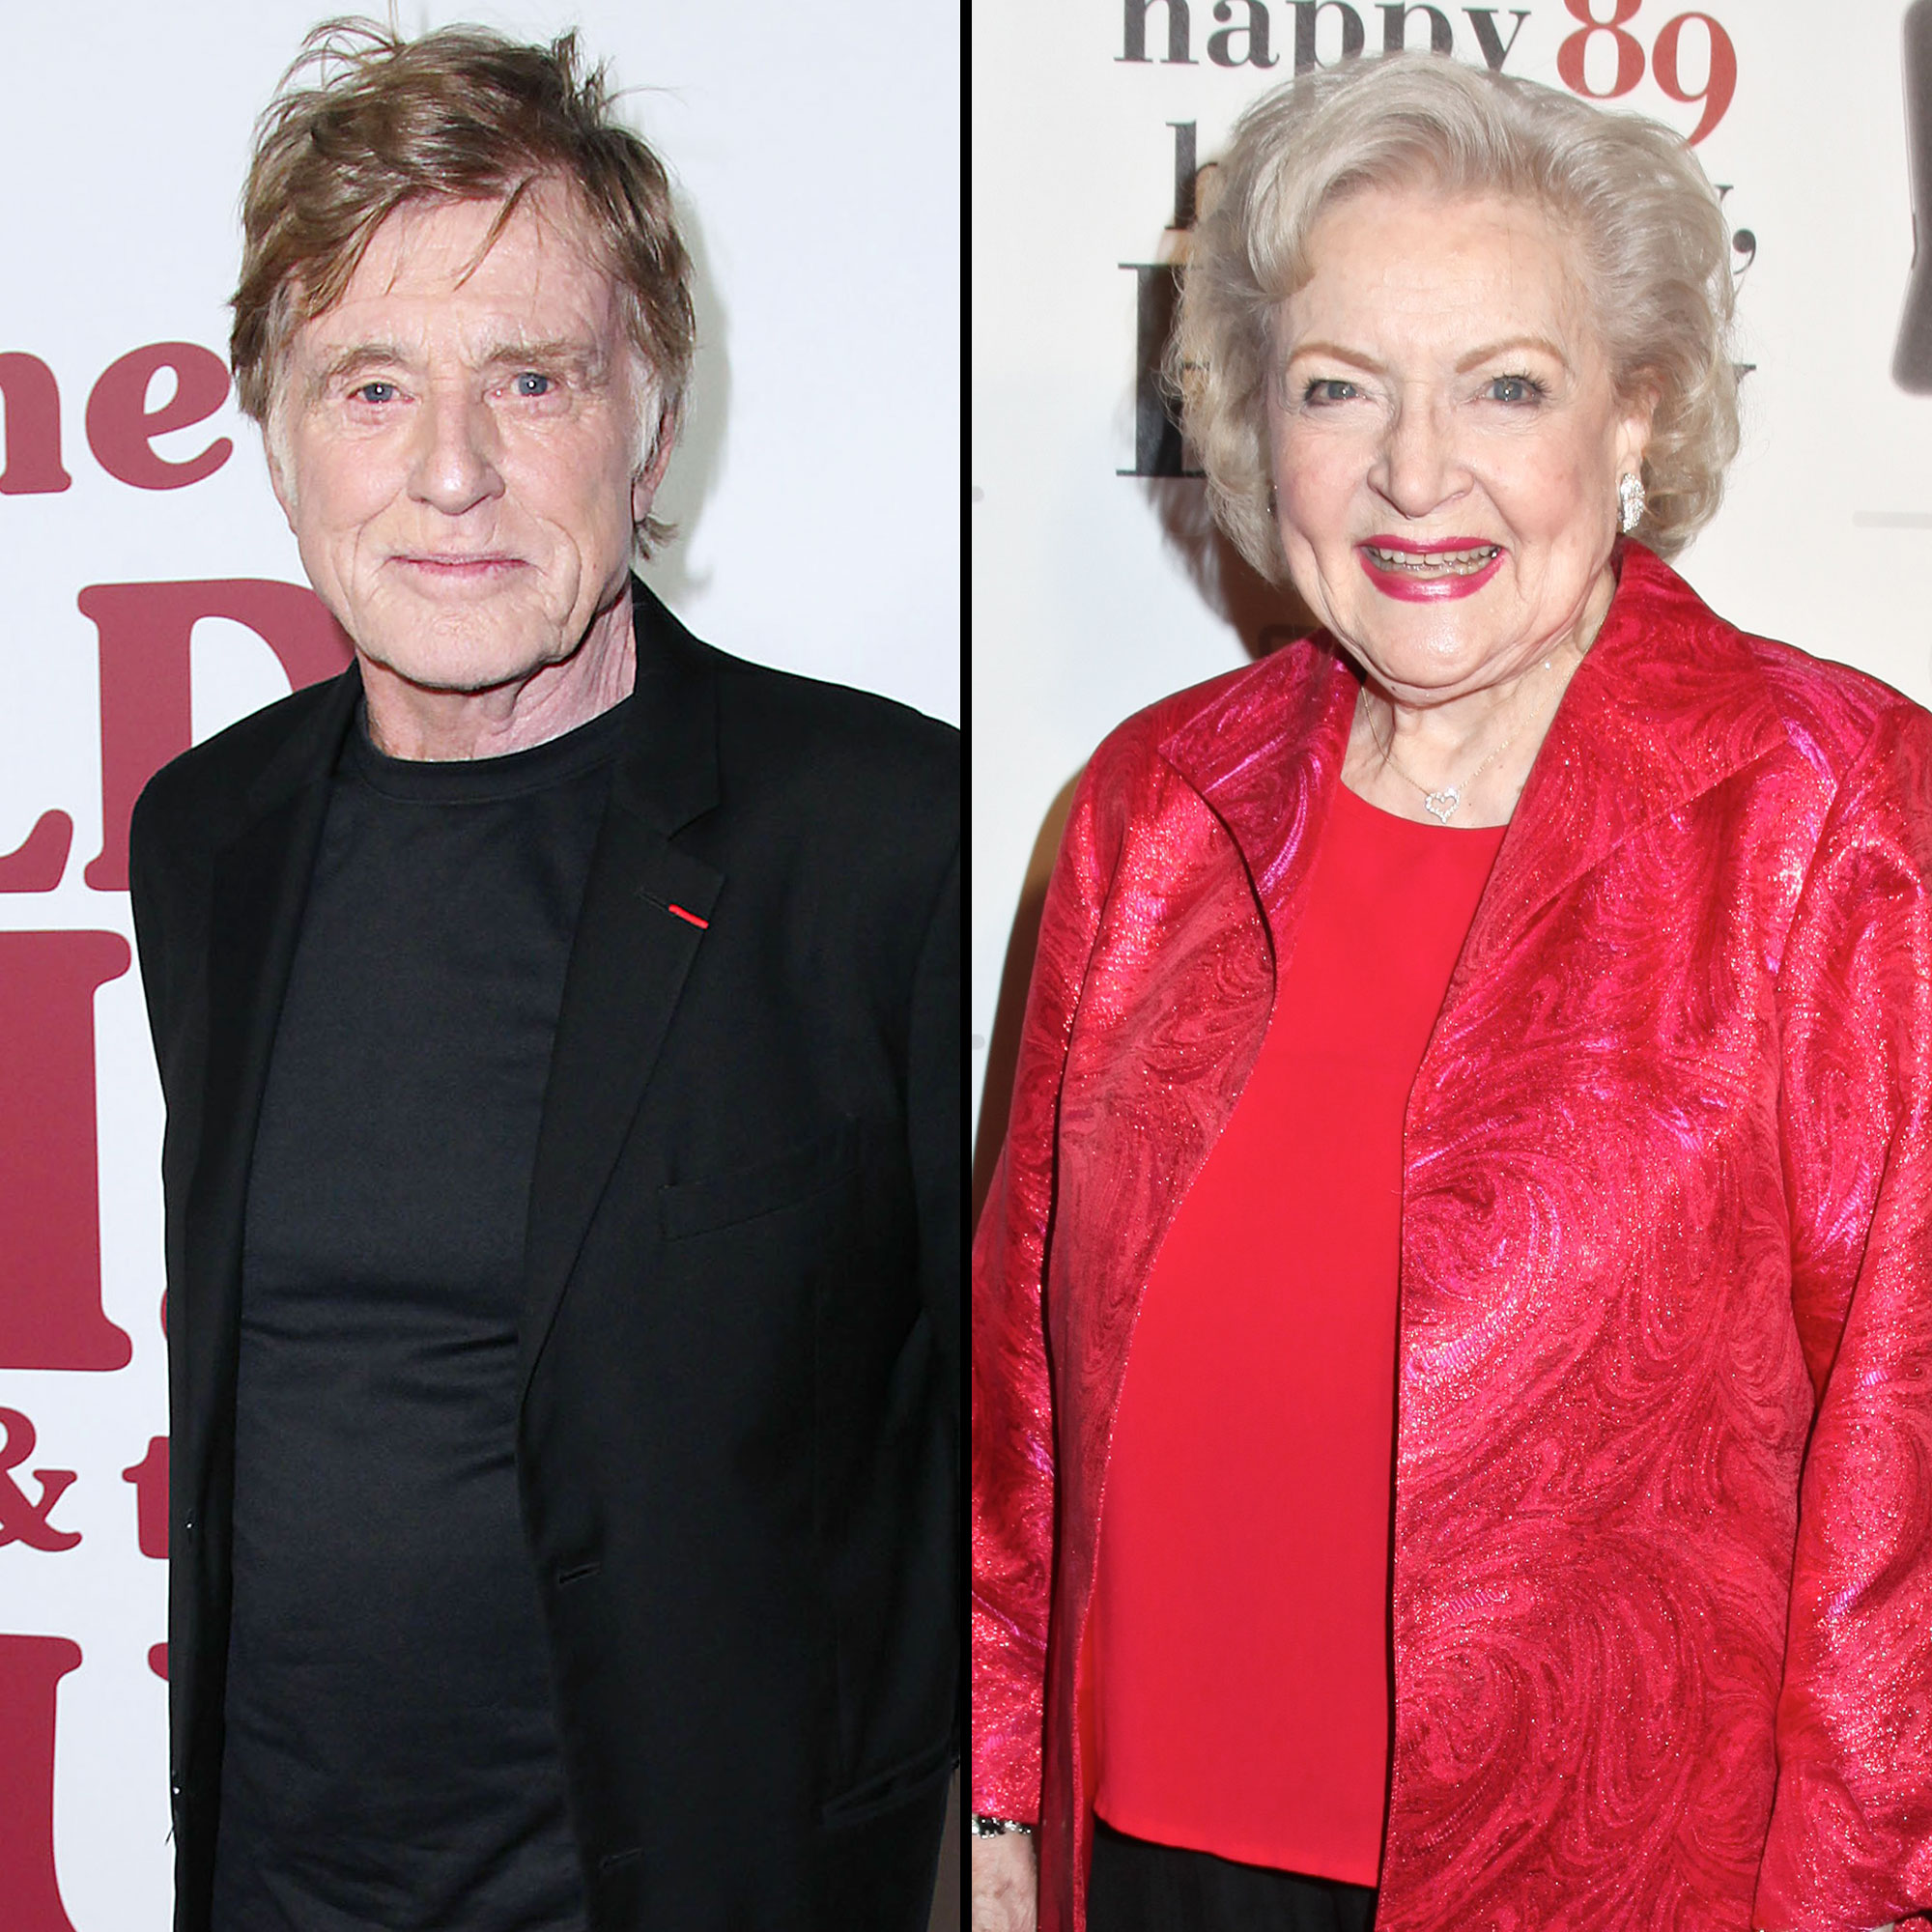 betty-white’s-longtime-crush-robert-redford-pays-tribute-after-her-death